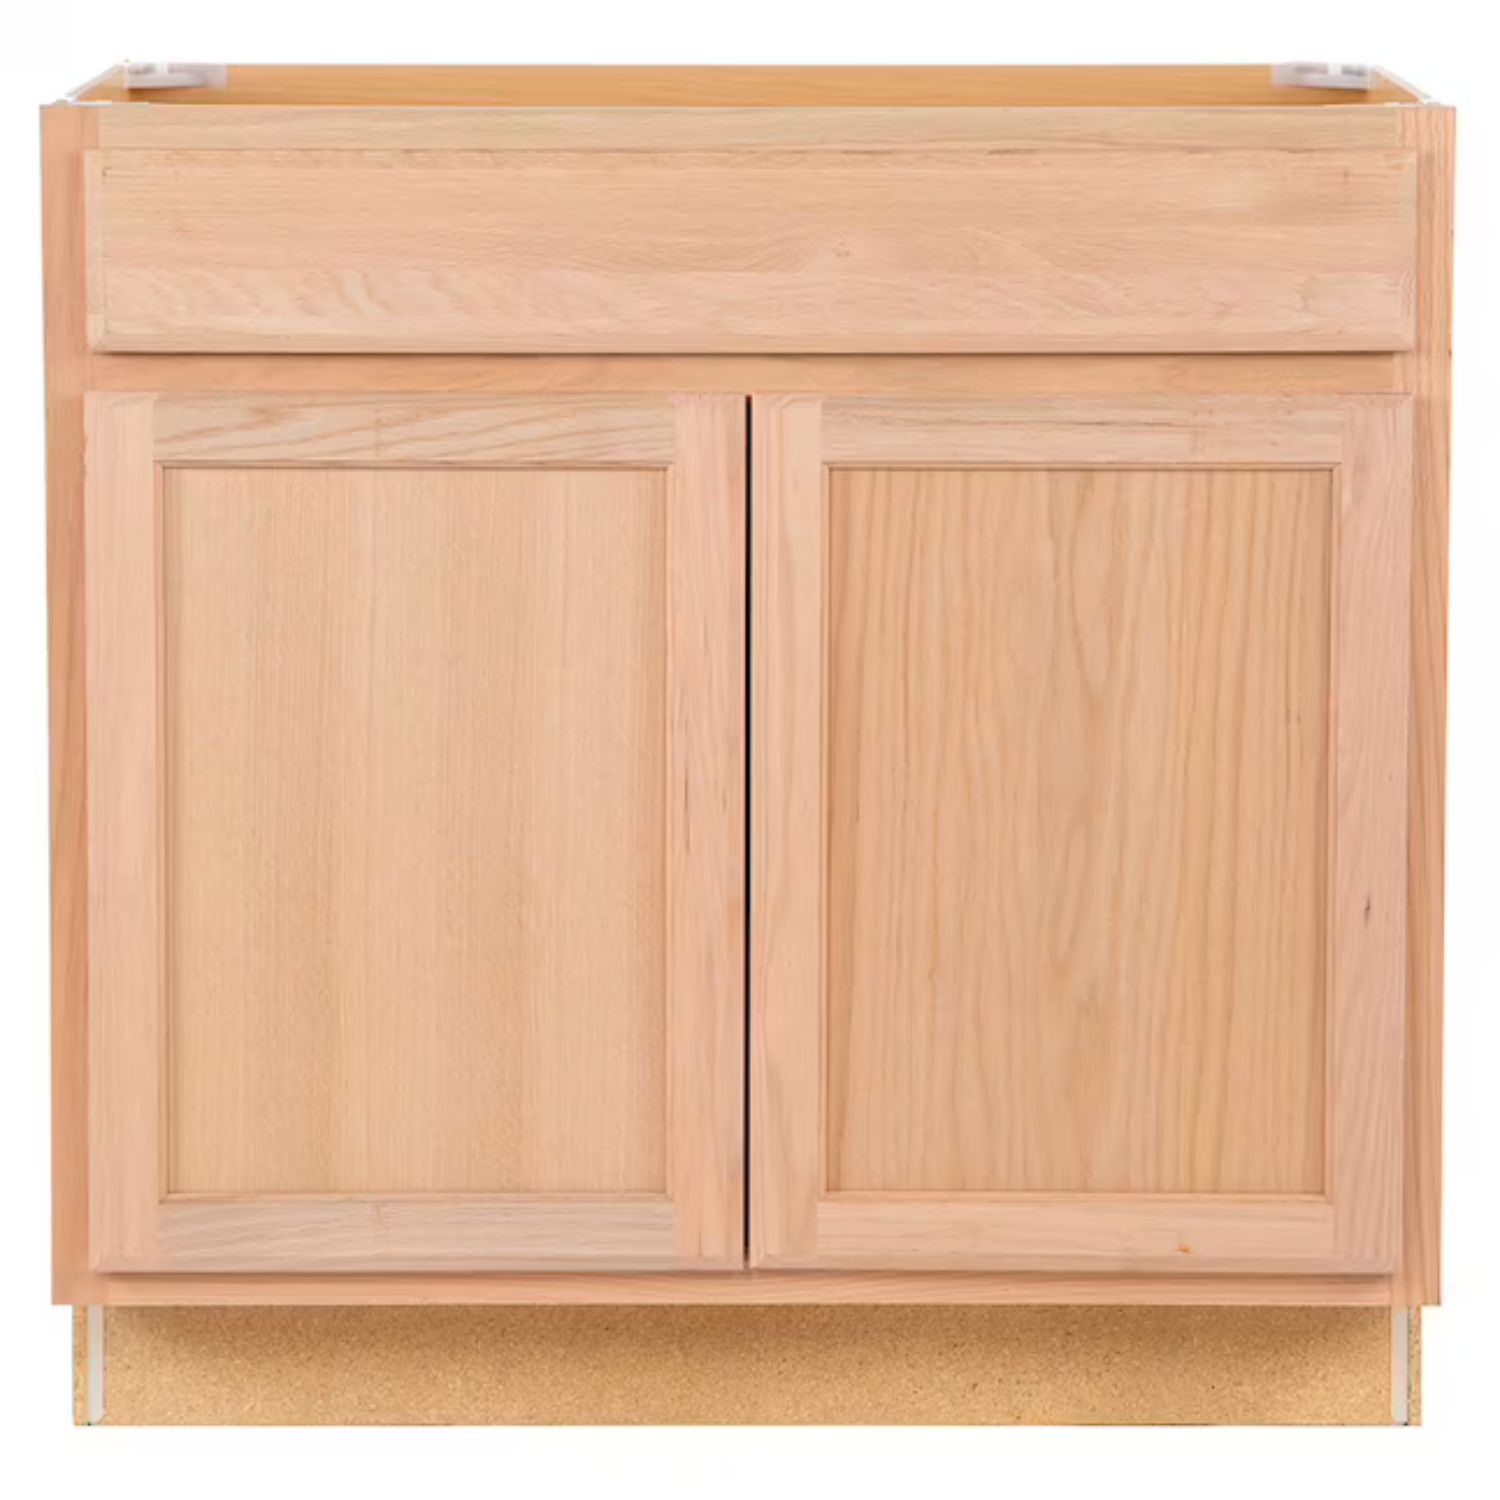 The Best Place to Buy Cabinets Option: Lowe’s